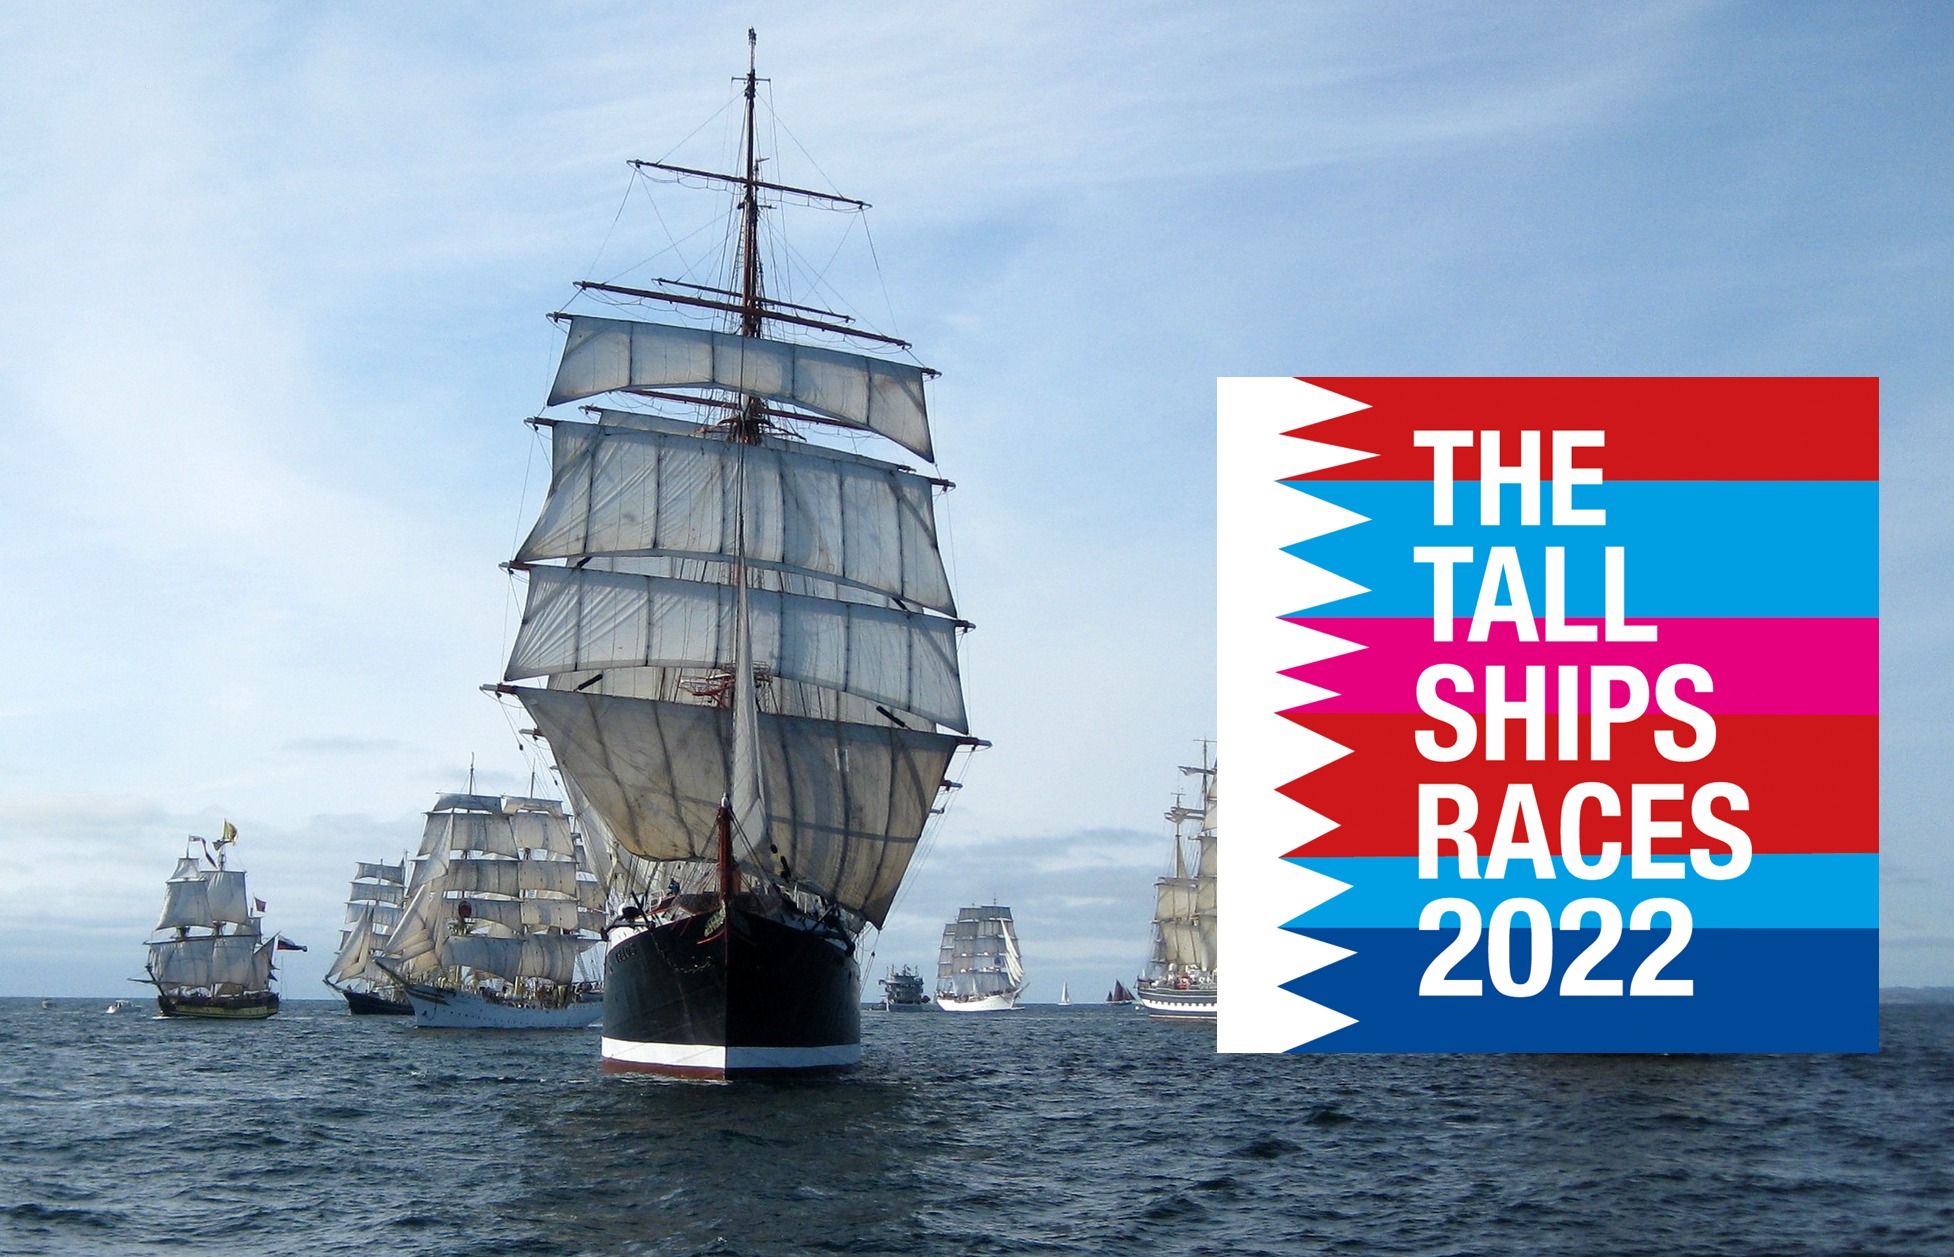 The Tall Ships Races 2022